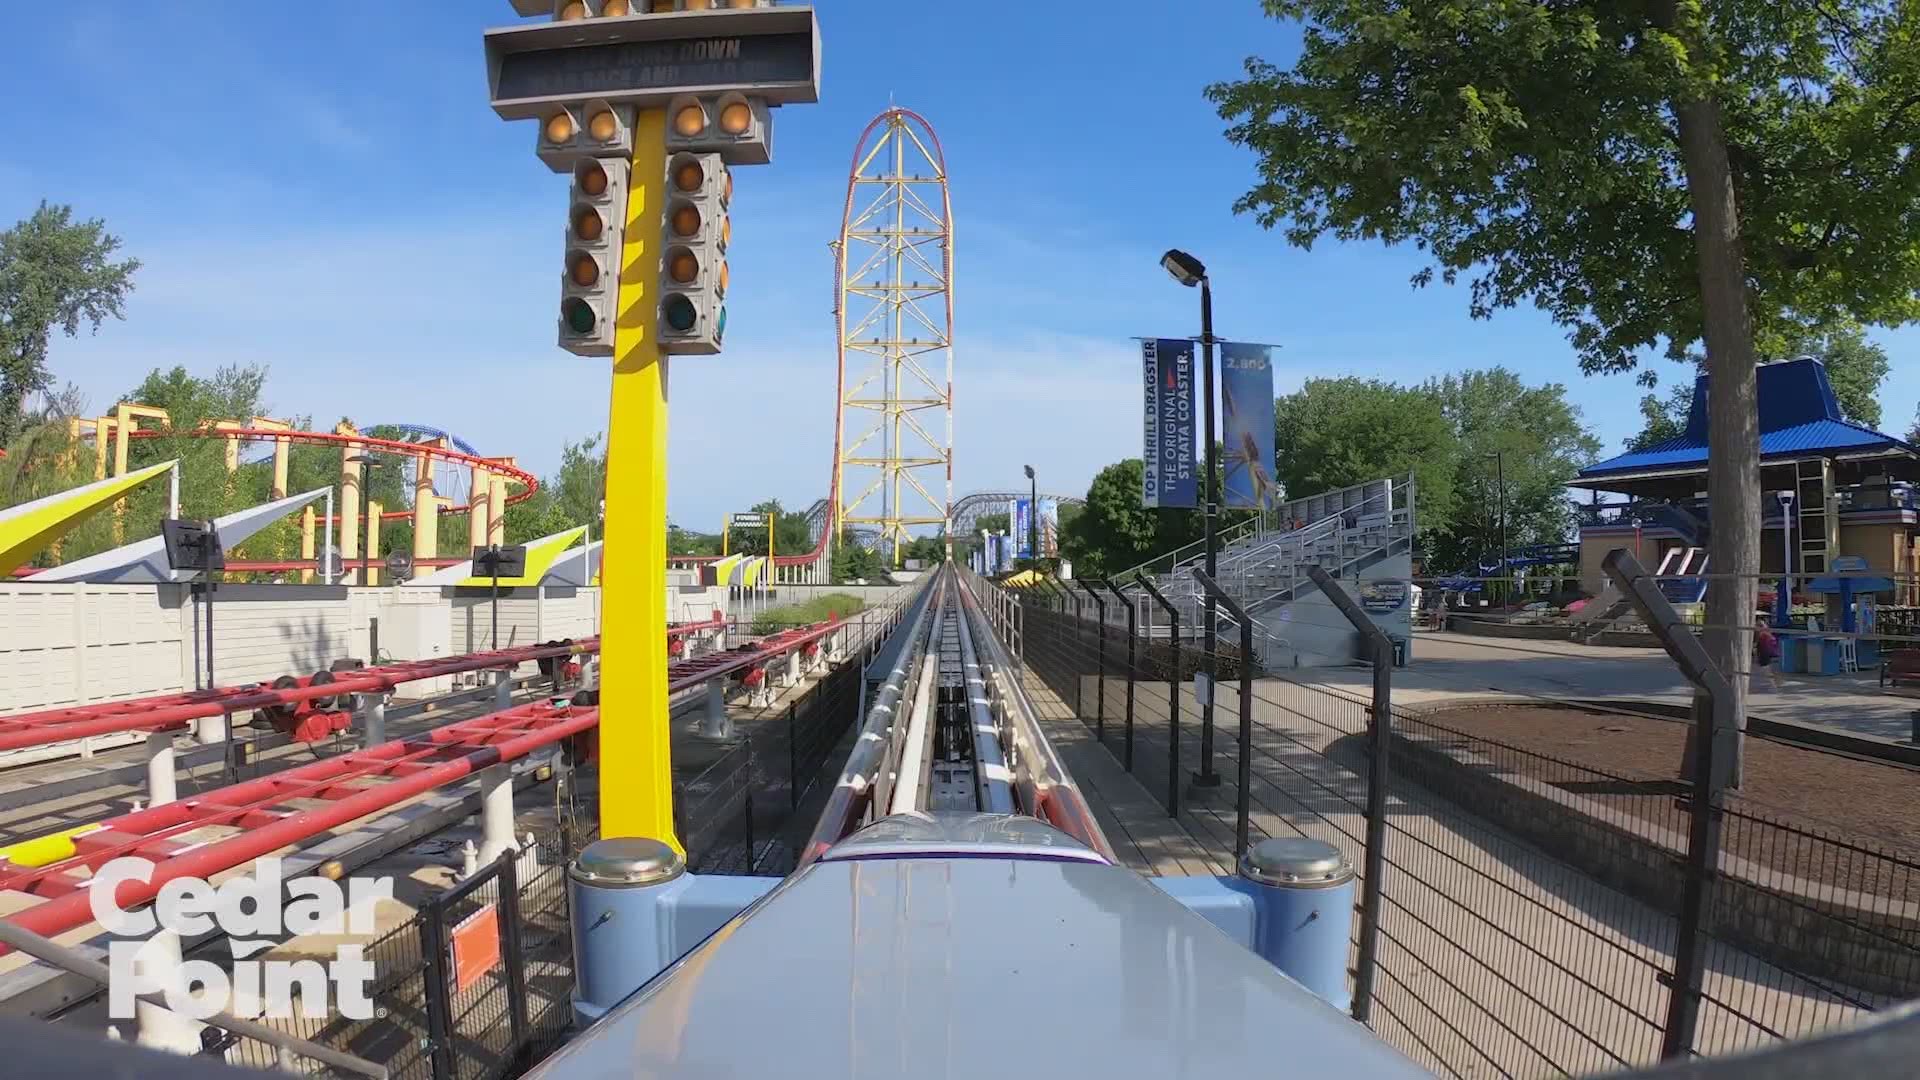 Take a front-seat ride on Cedar Point's Top Thrill Dragster roller coaster. It takes riders on a 120 mph journey up and over a 420-foot hill.